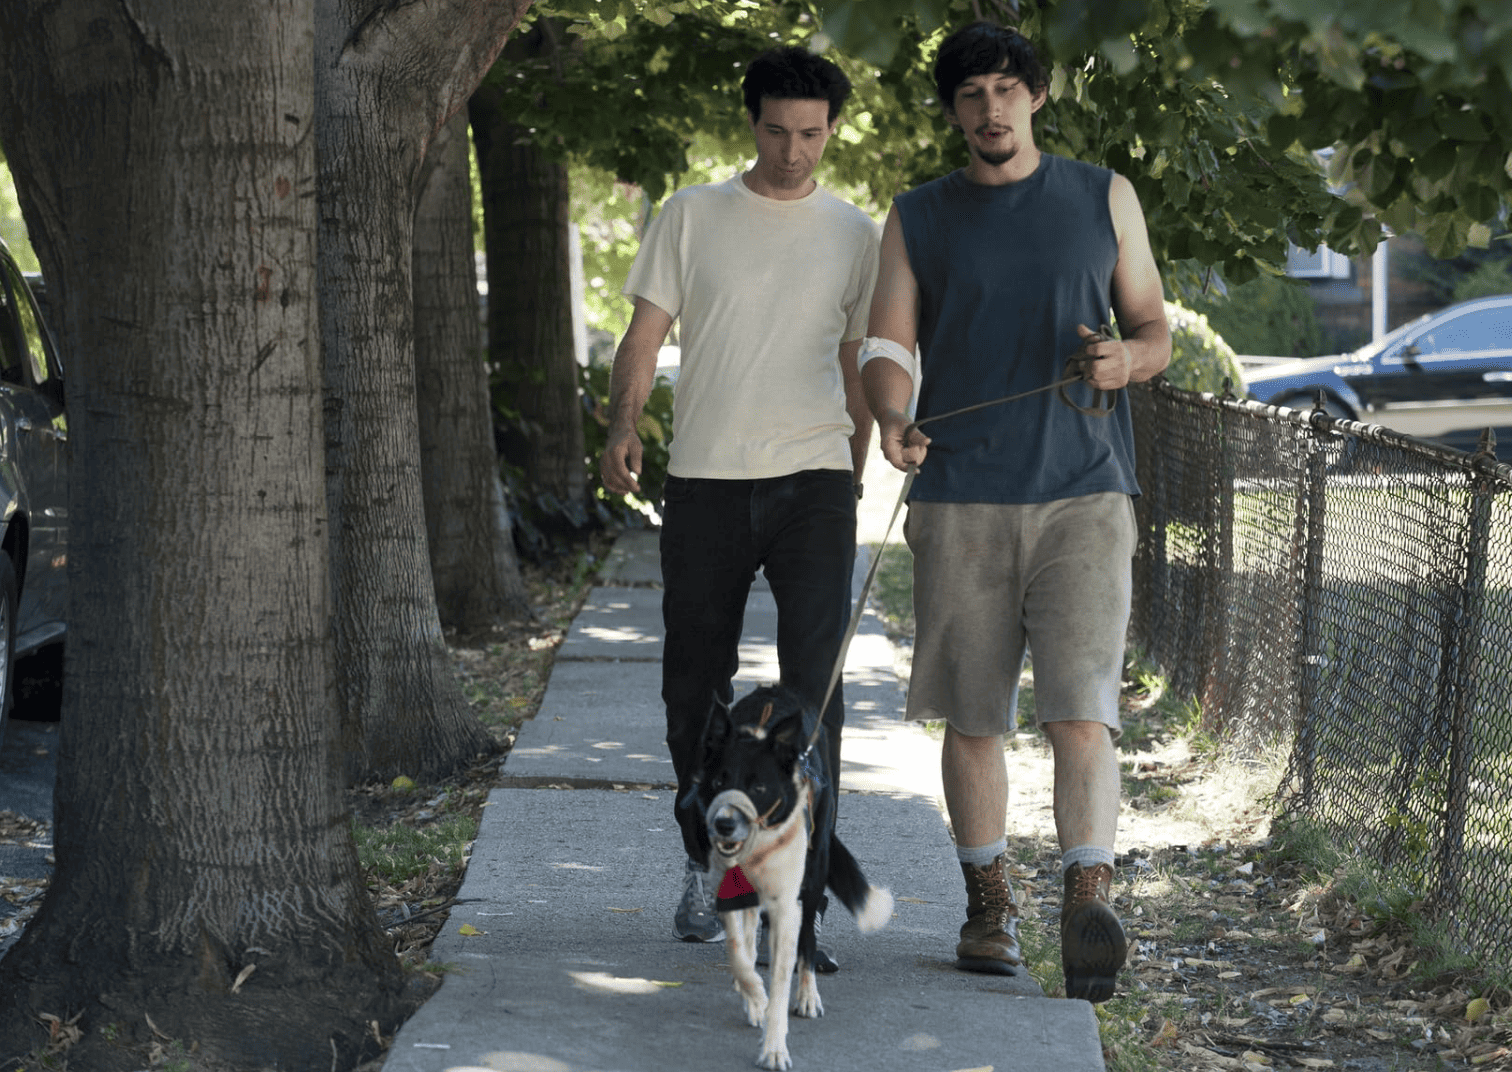 Ray and Adam walk a muzzled dog in this image from Apatow Productions